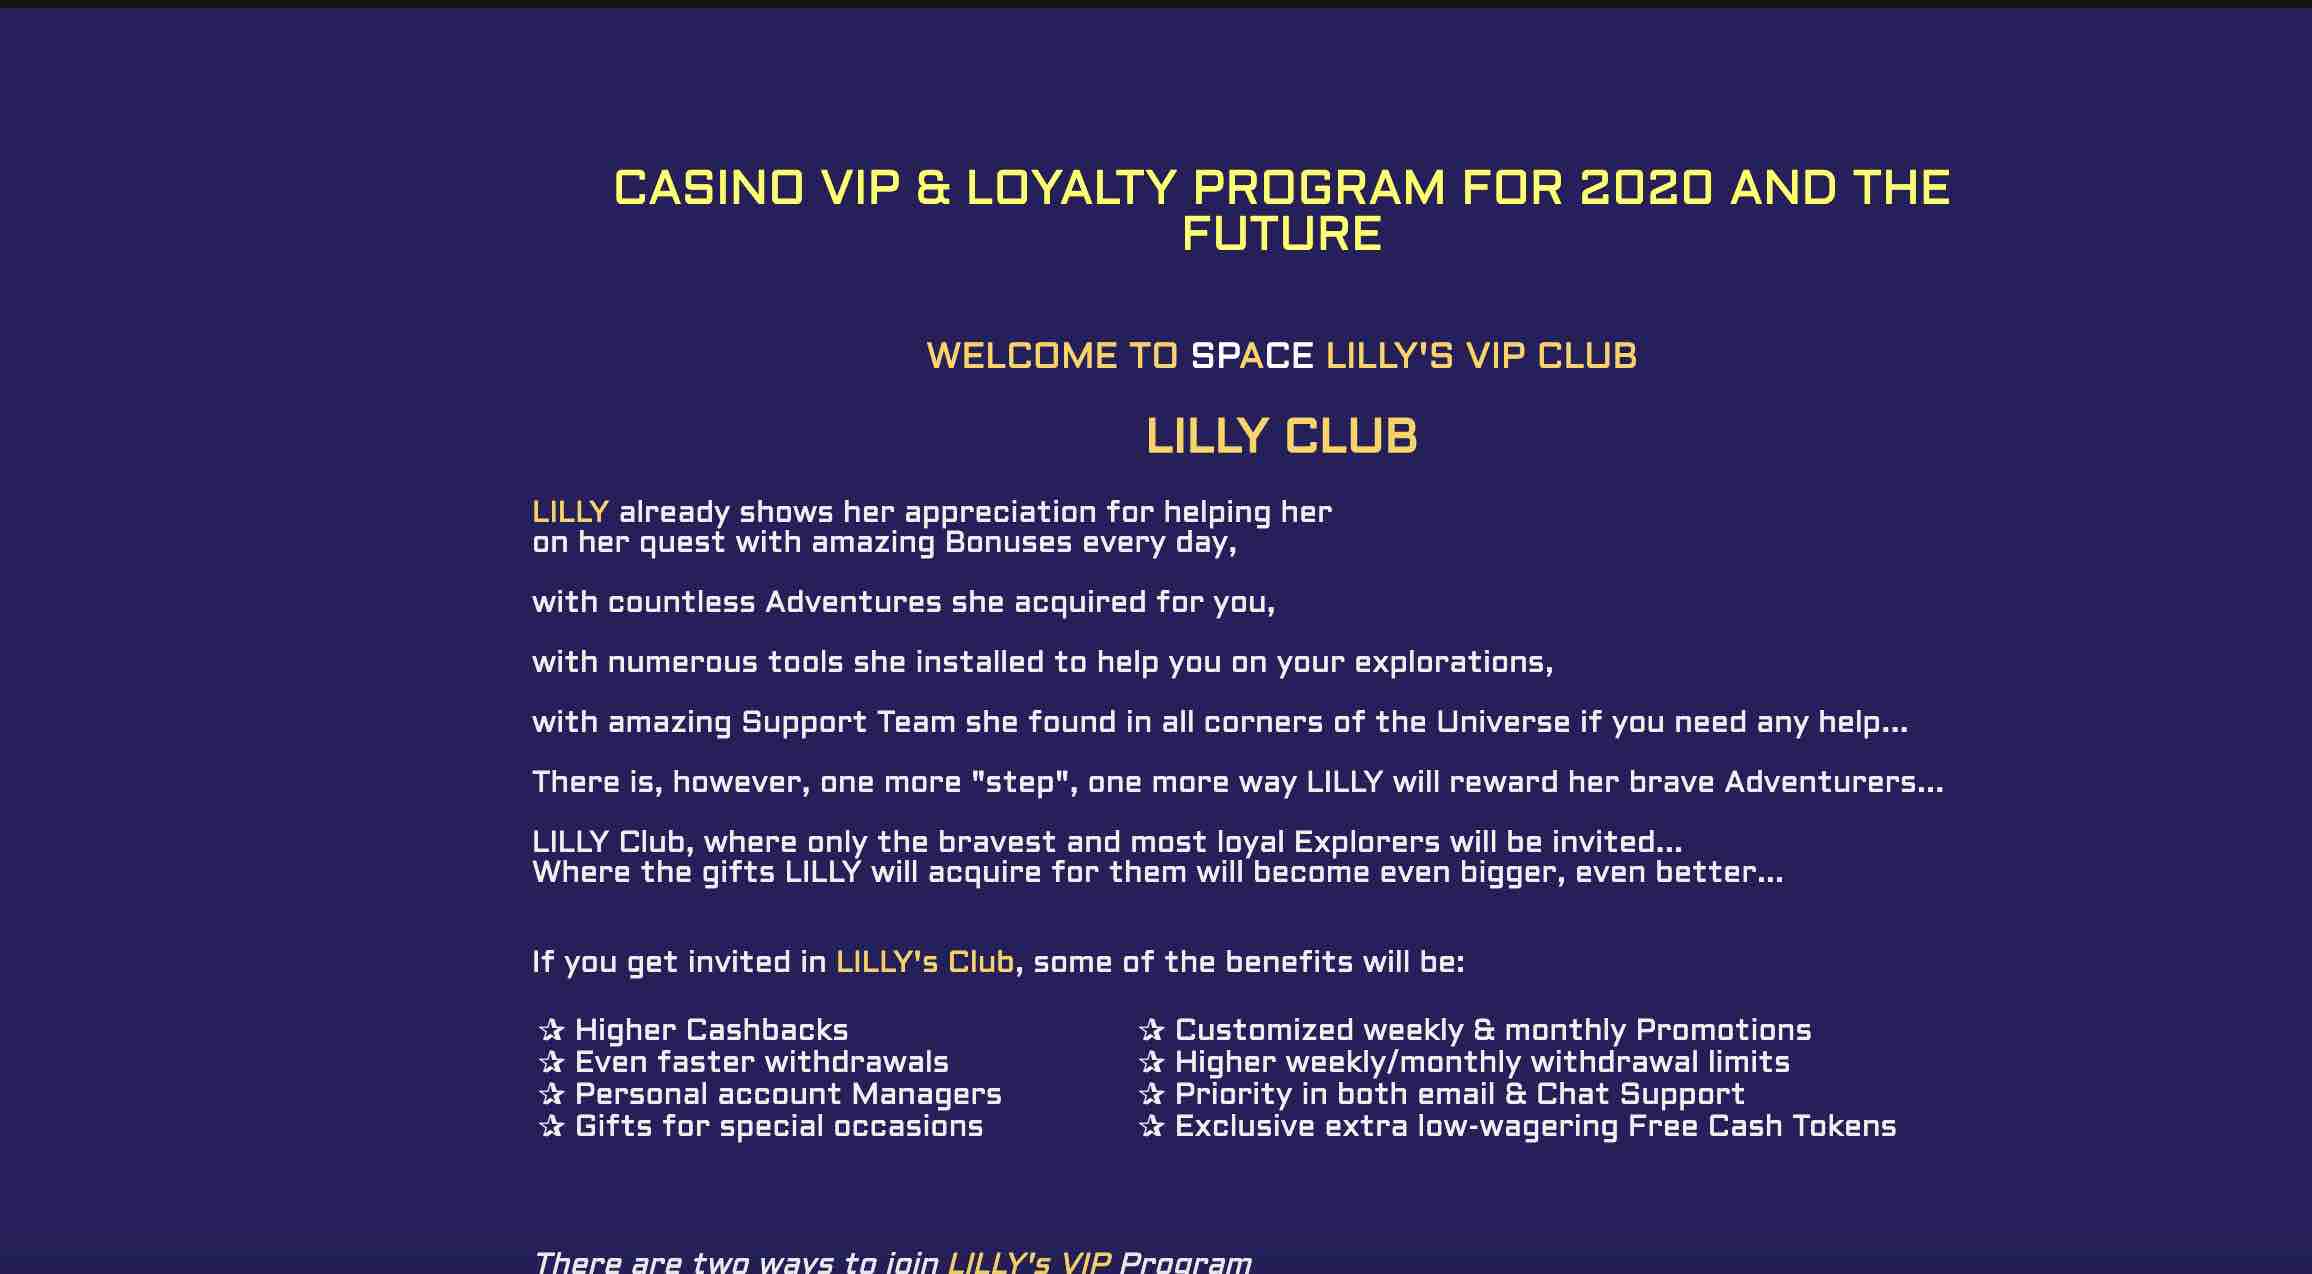 Space Lilly Casino VIP Club